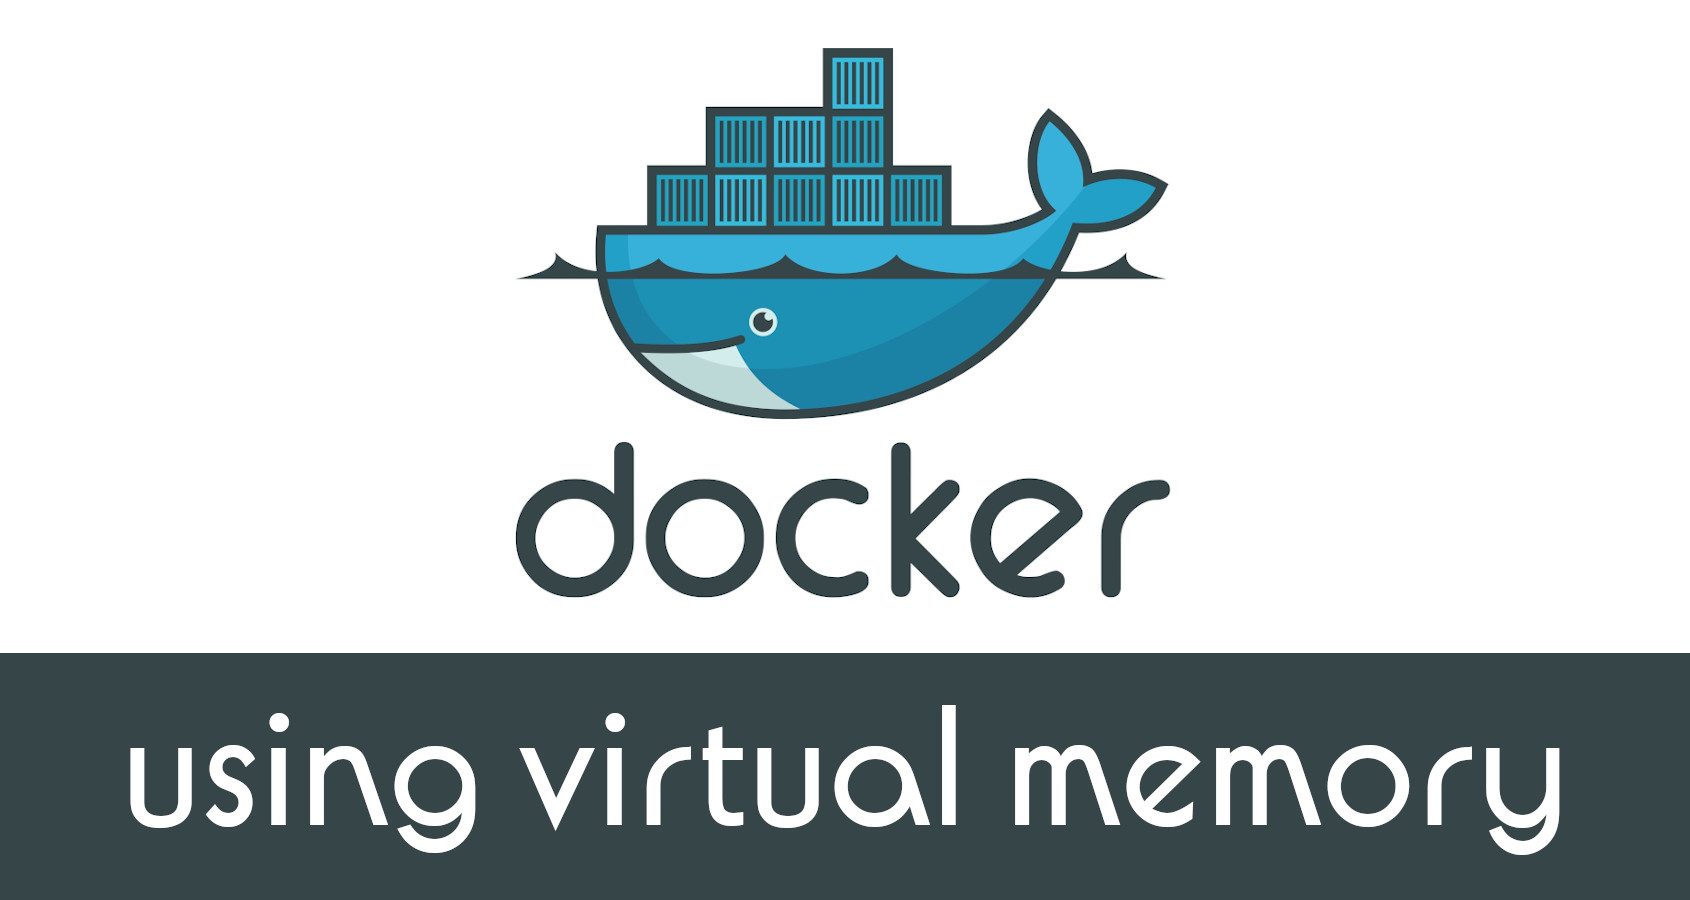 Accessing Virtual Memory from a Docker Container